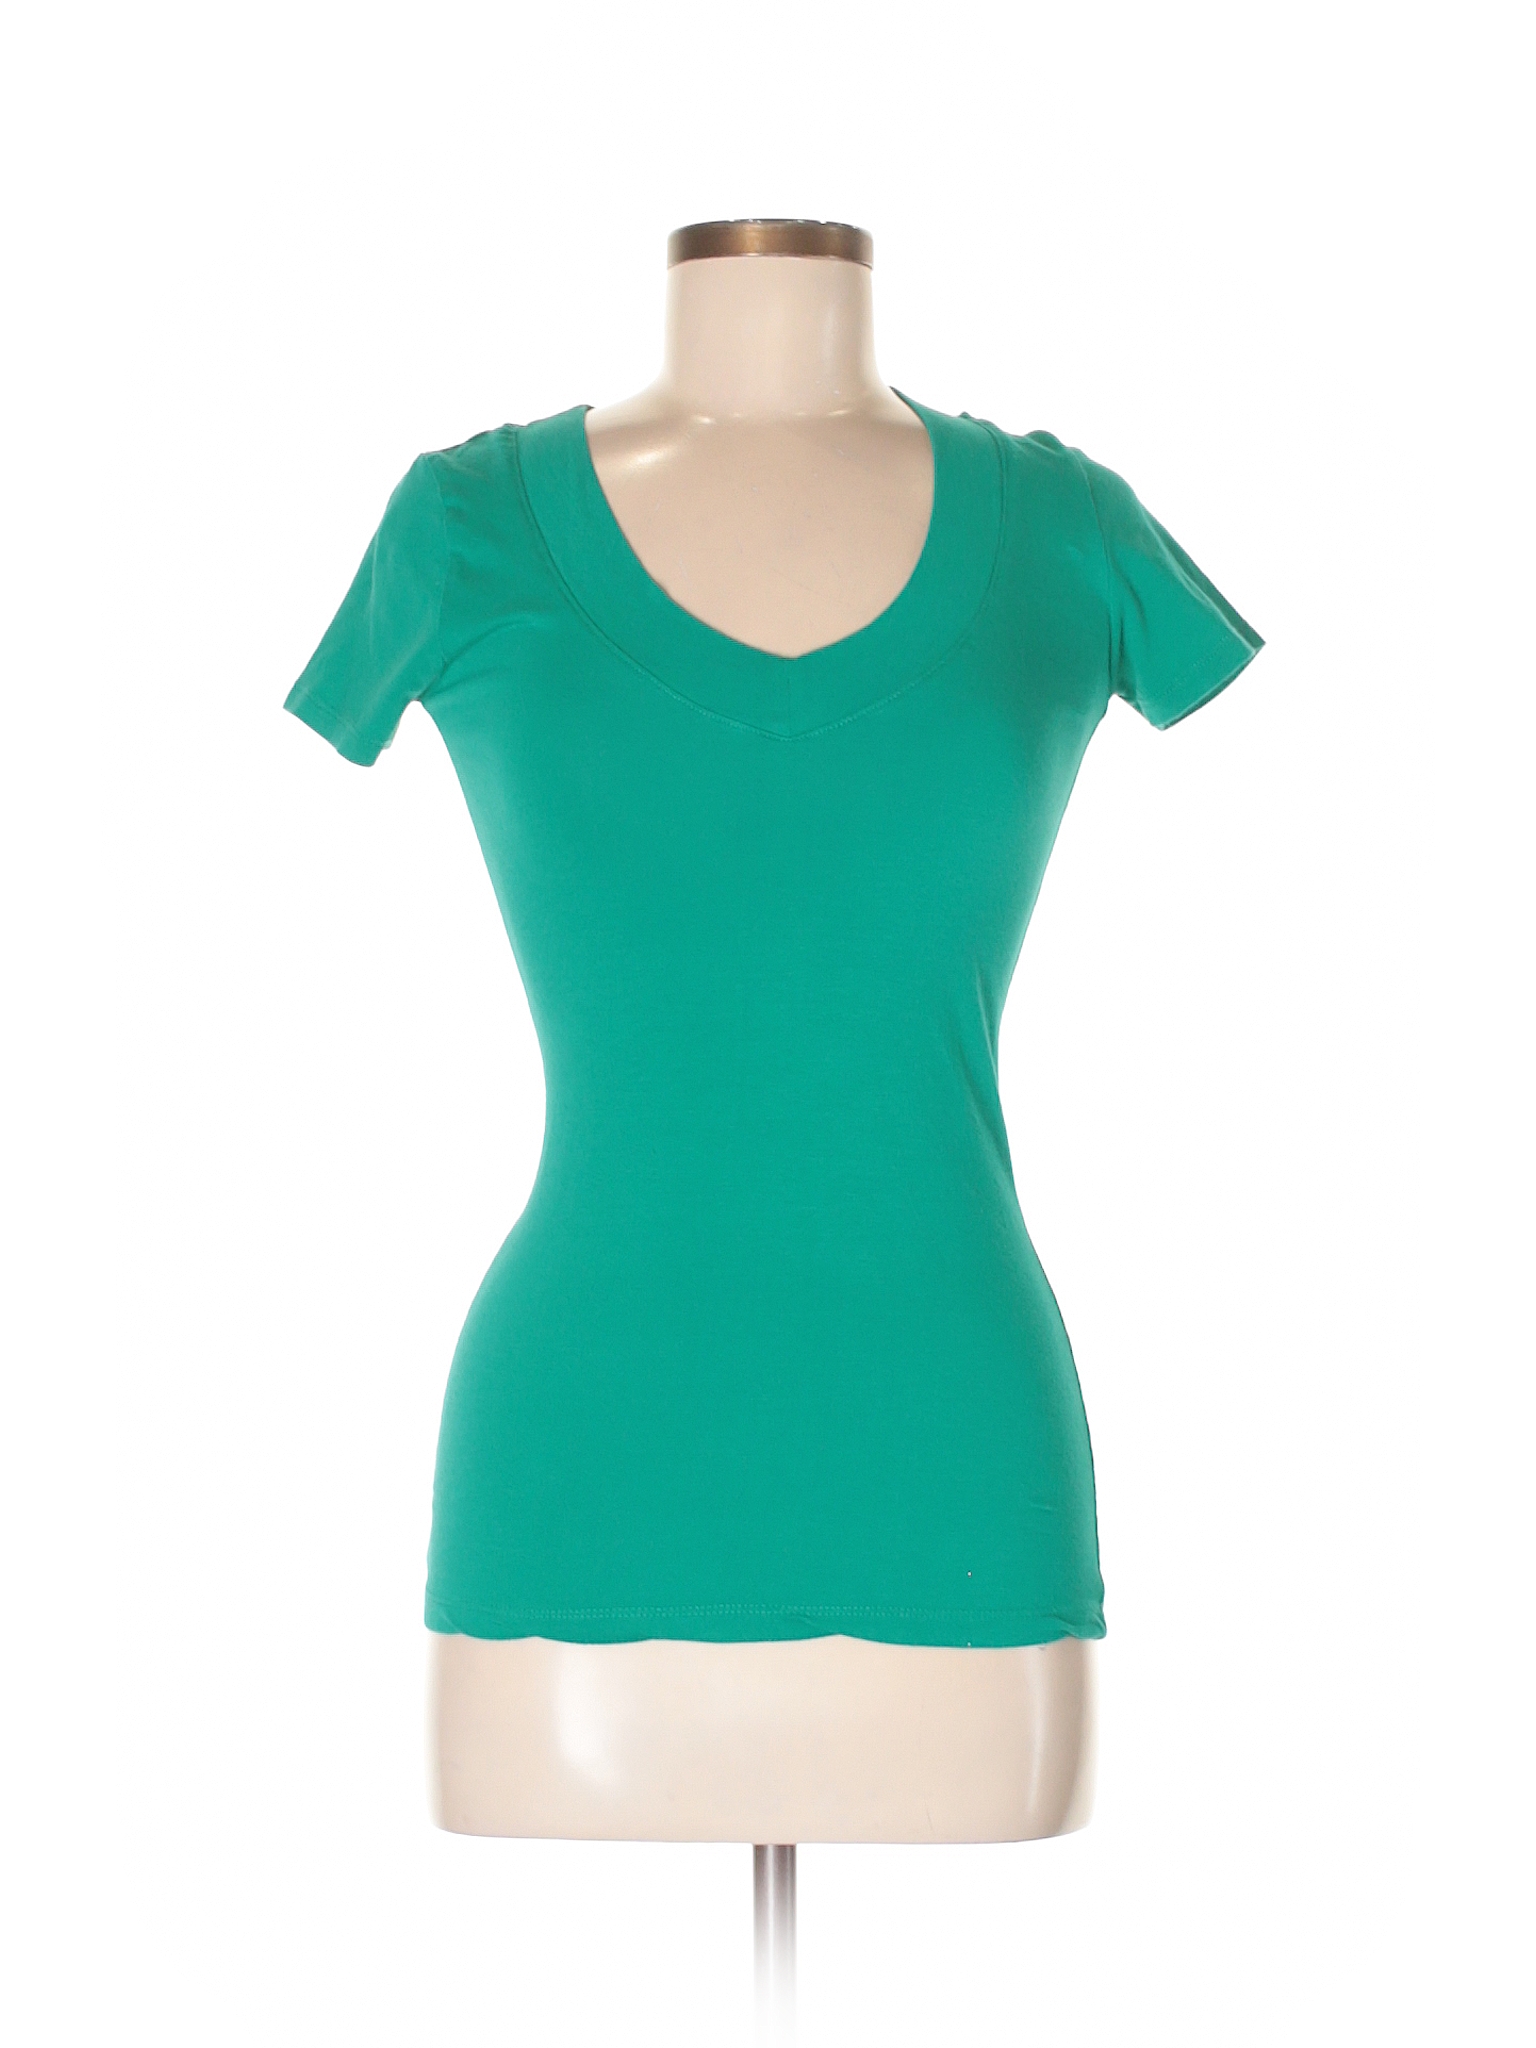 Ambiance Apparel Solid Teal Short Sleeve T-Shirt Size M - 77% off | thredUP